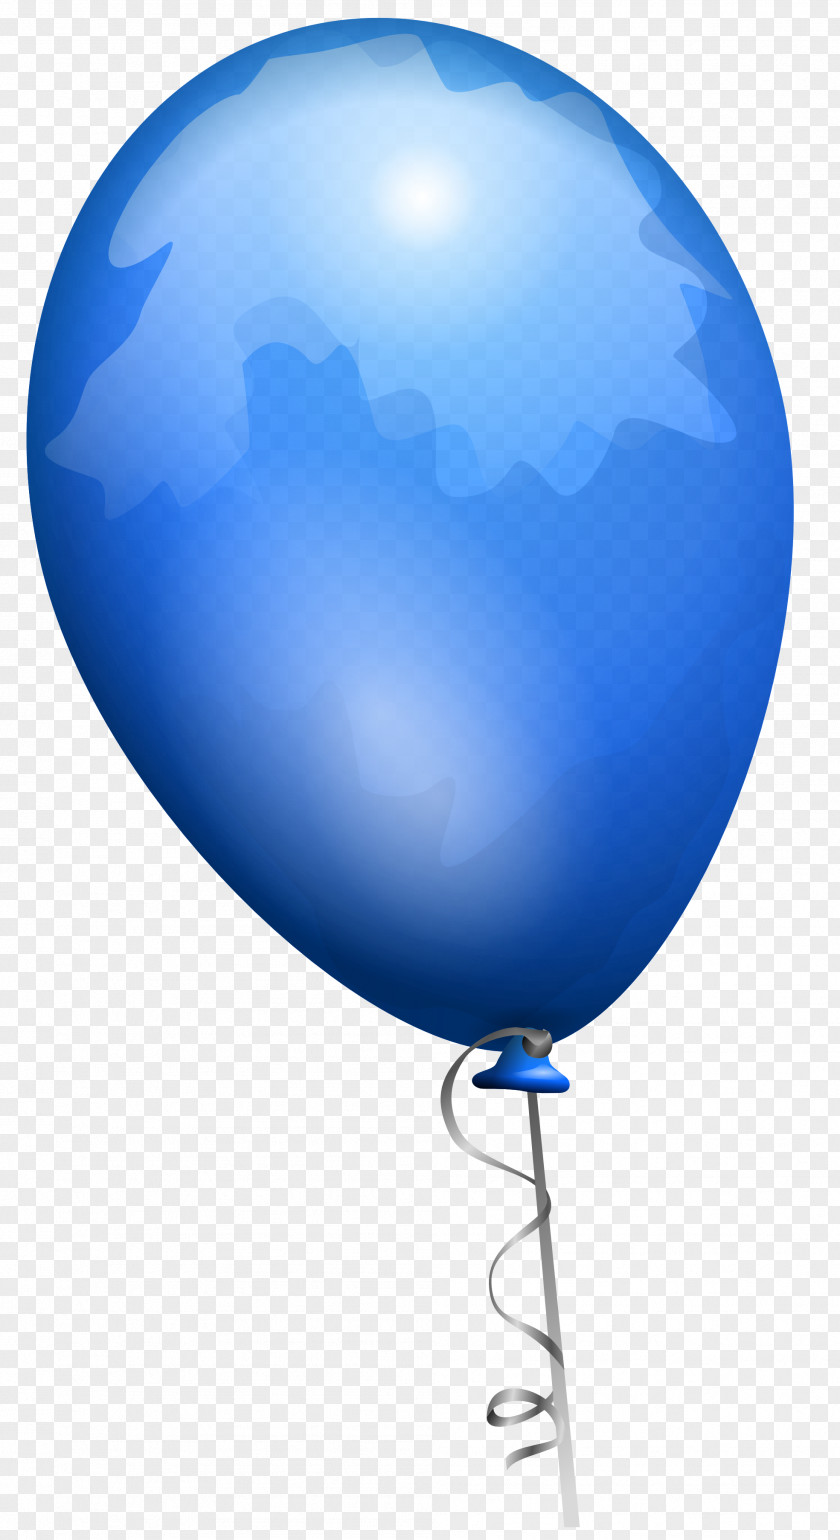 Red Balloon Image, Free Download Clip Art PNG